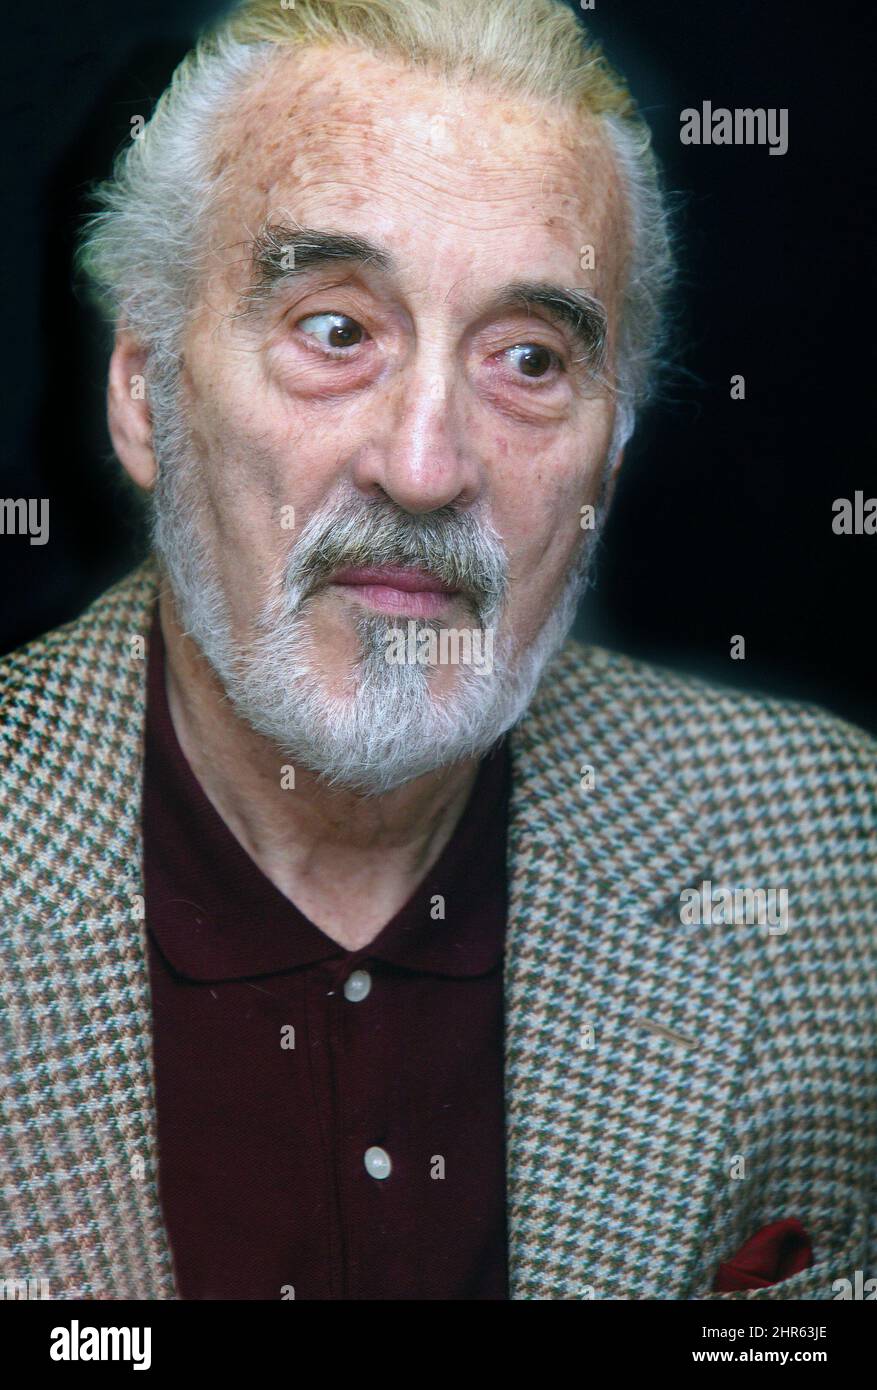 Christopher Lee,who plays the role of SARUMAN in the Lord of The Rings trilogy,promoting his autobiography LORD OF MISRULE at Waterstones bookshop in Stock Photo